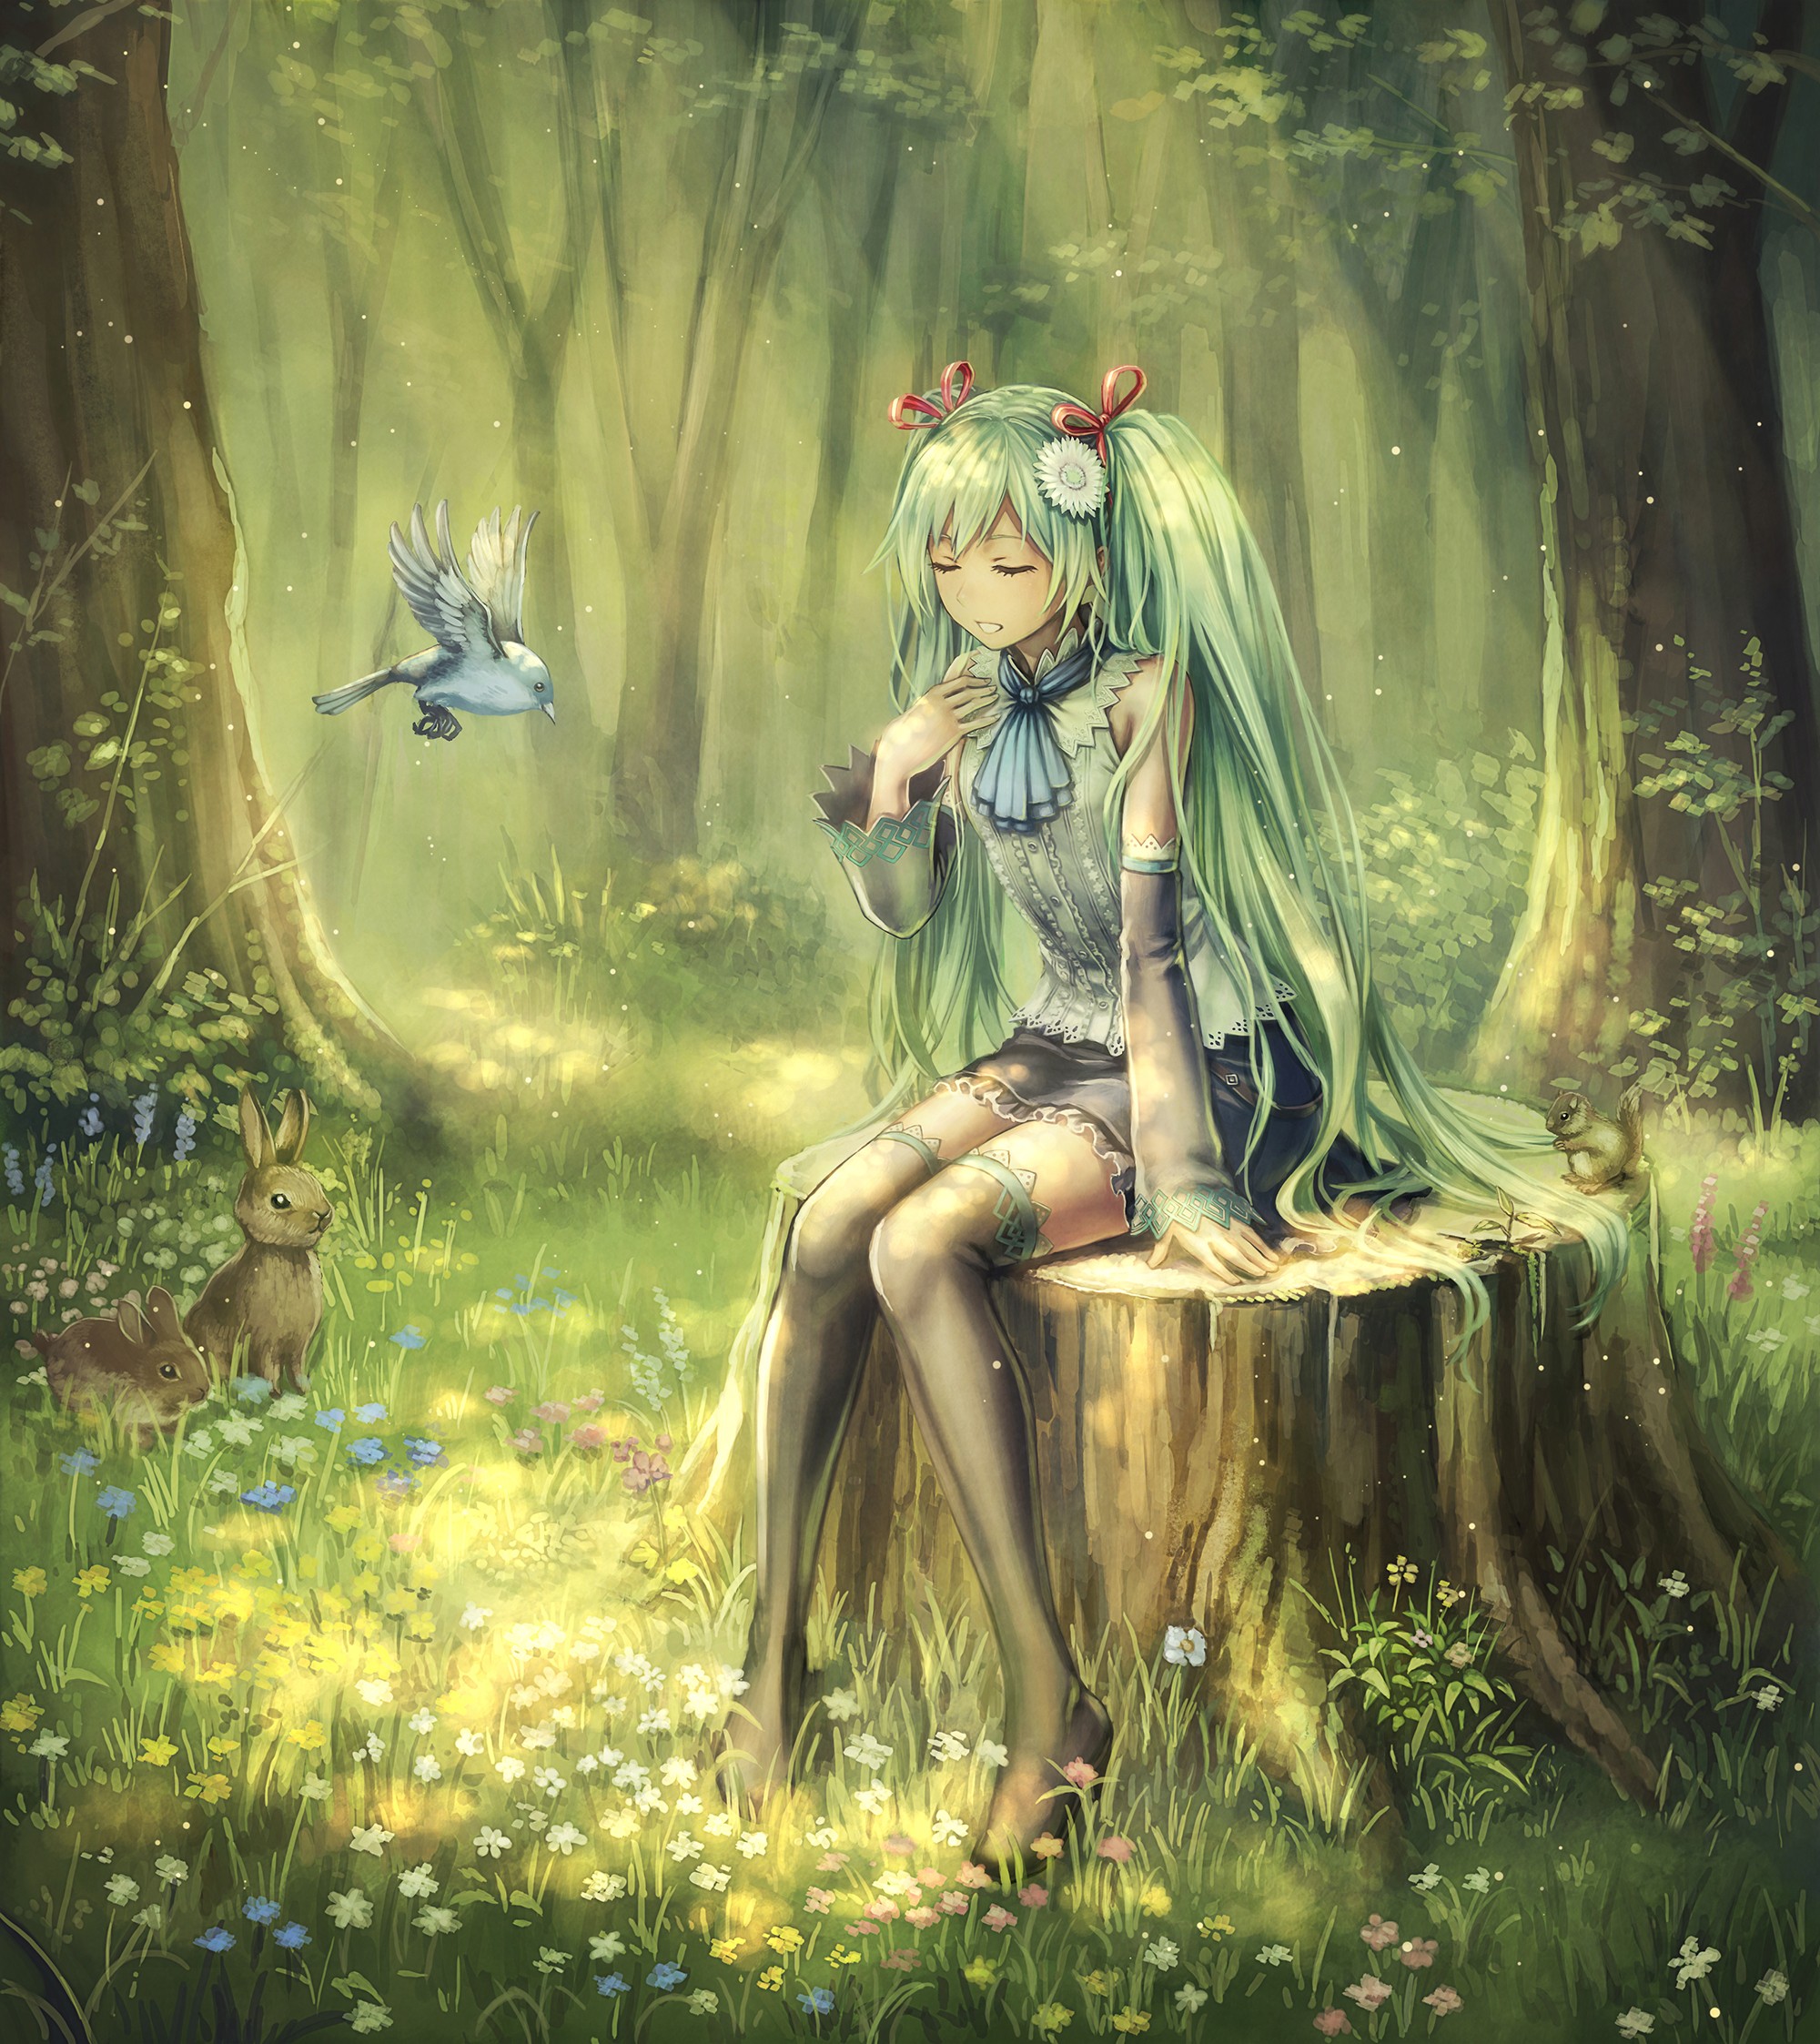 Anime 2000x2246 Vocaloid twintails anime girls fantasy art sitting stockings birds animals green hair long hair flower in hair thighs together rabbits mammals flowers plants trees nature